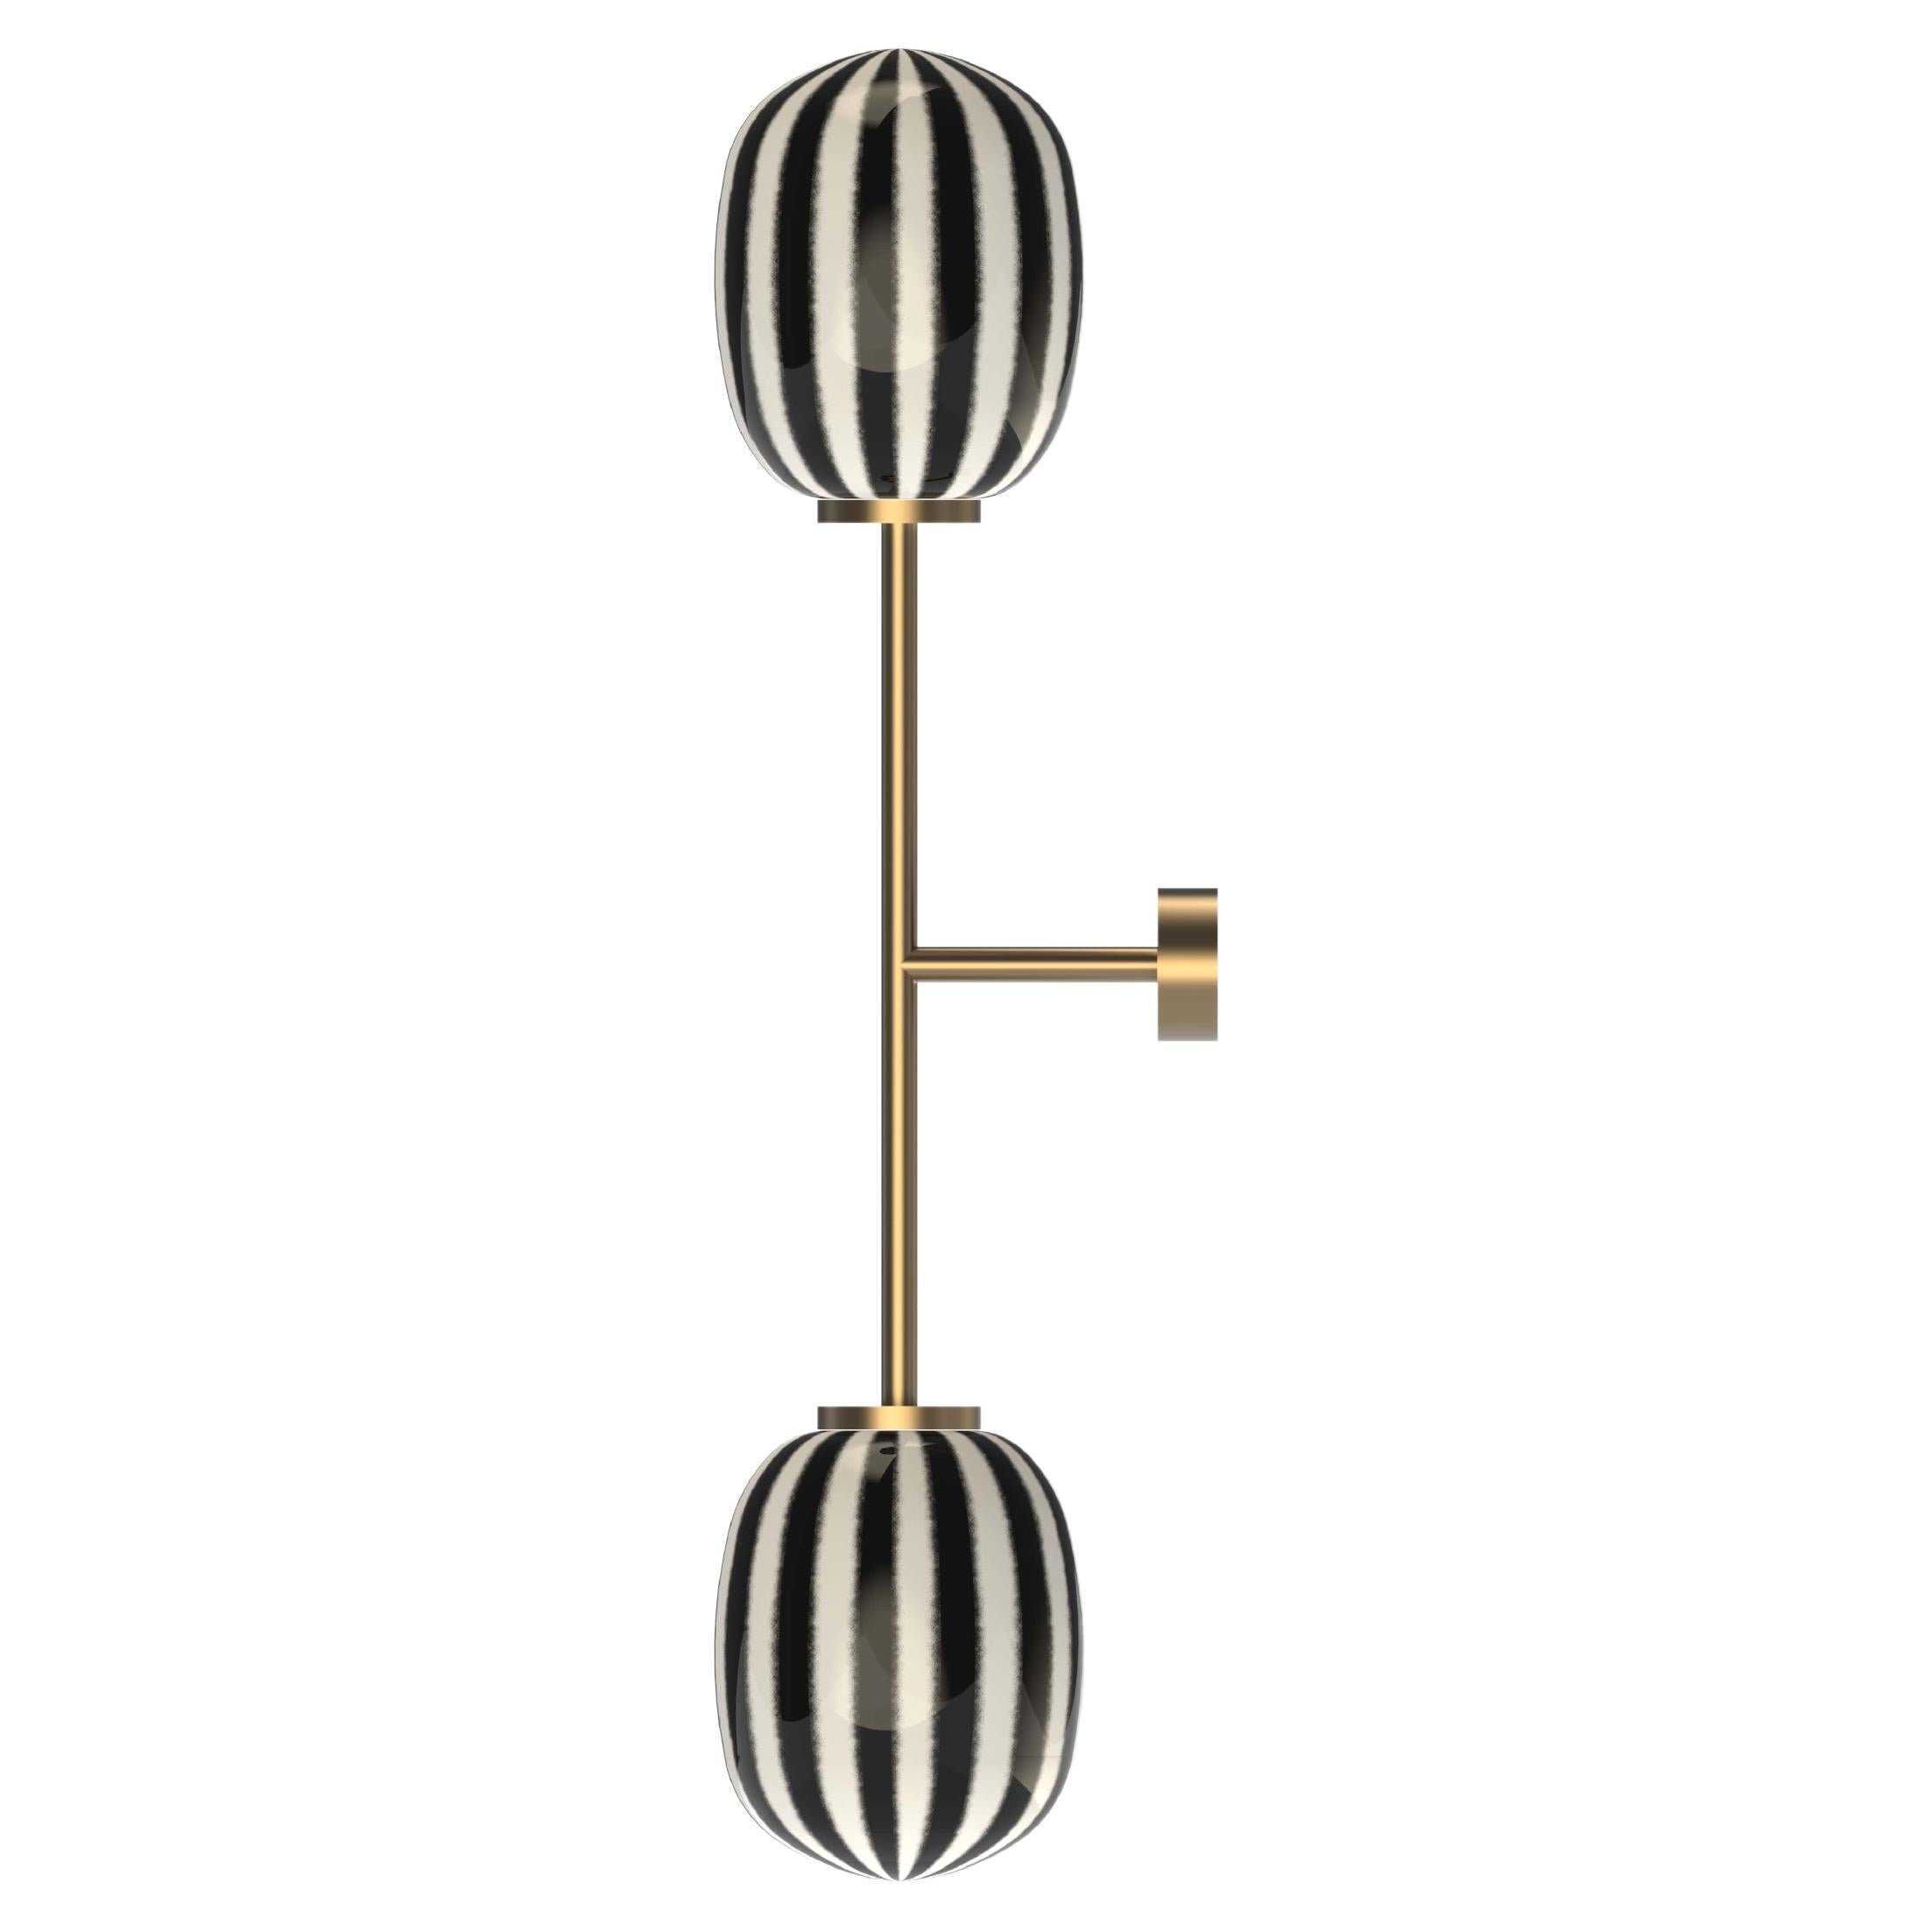 Double Bullseye Wall Sconce Light with Blown Glass and Brass